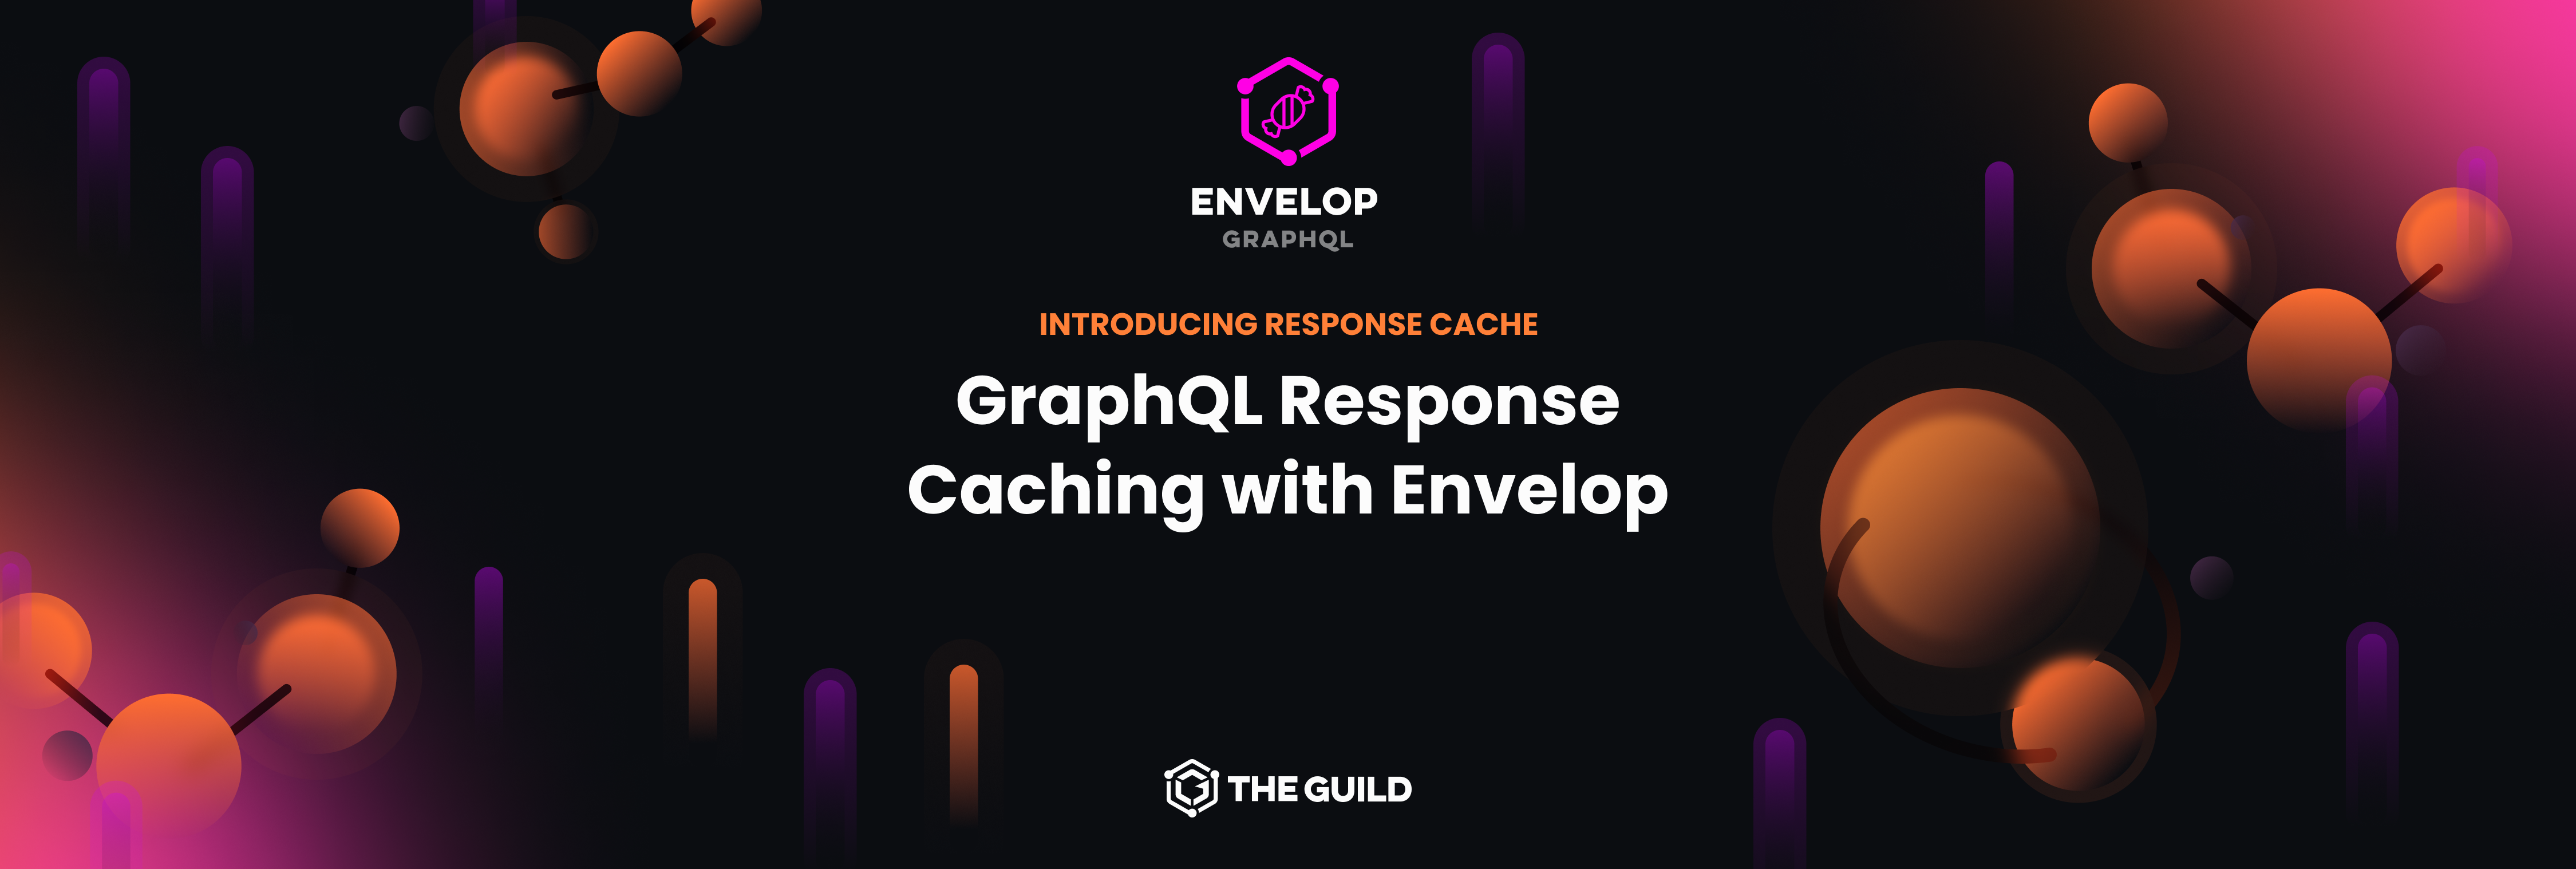 GraphQL Response Caching with Envelop - The Guild Blog